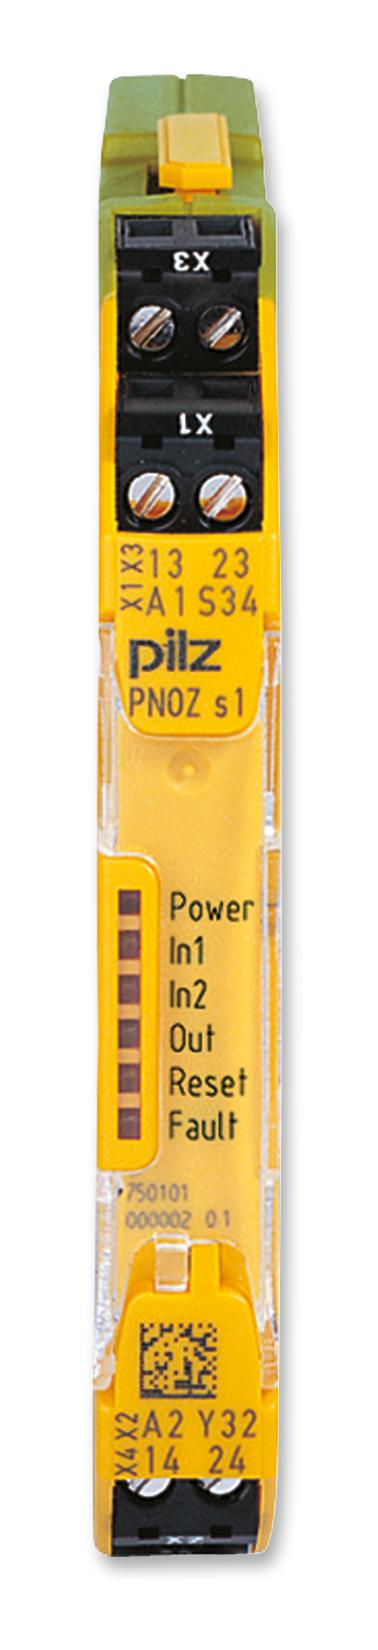 751101 RELAY, SAFETY, DPST-NO, 240VAC, 3A PILZ